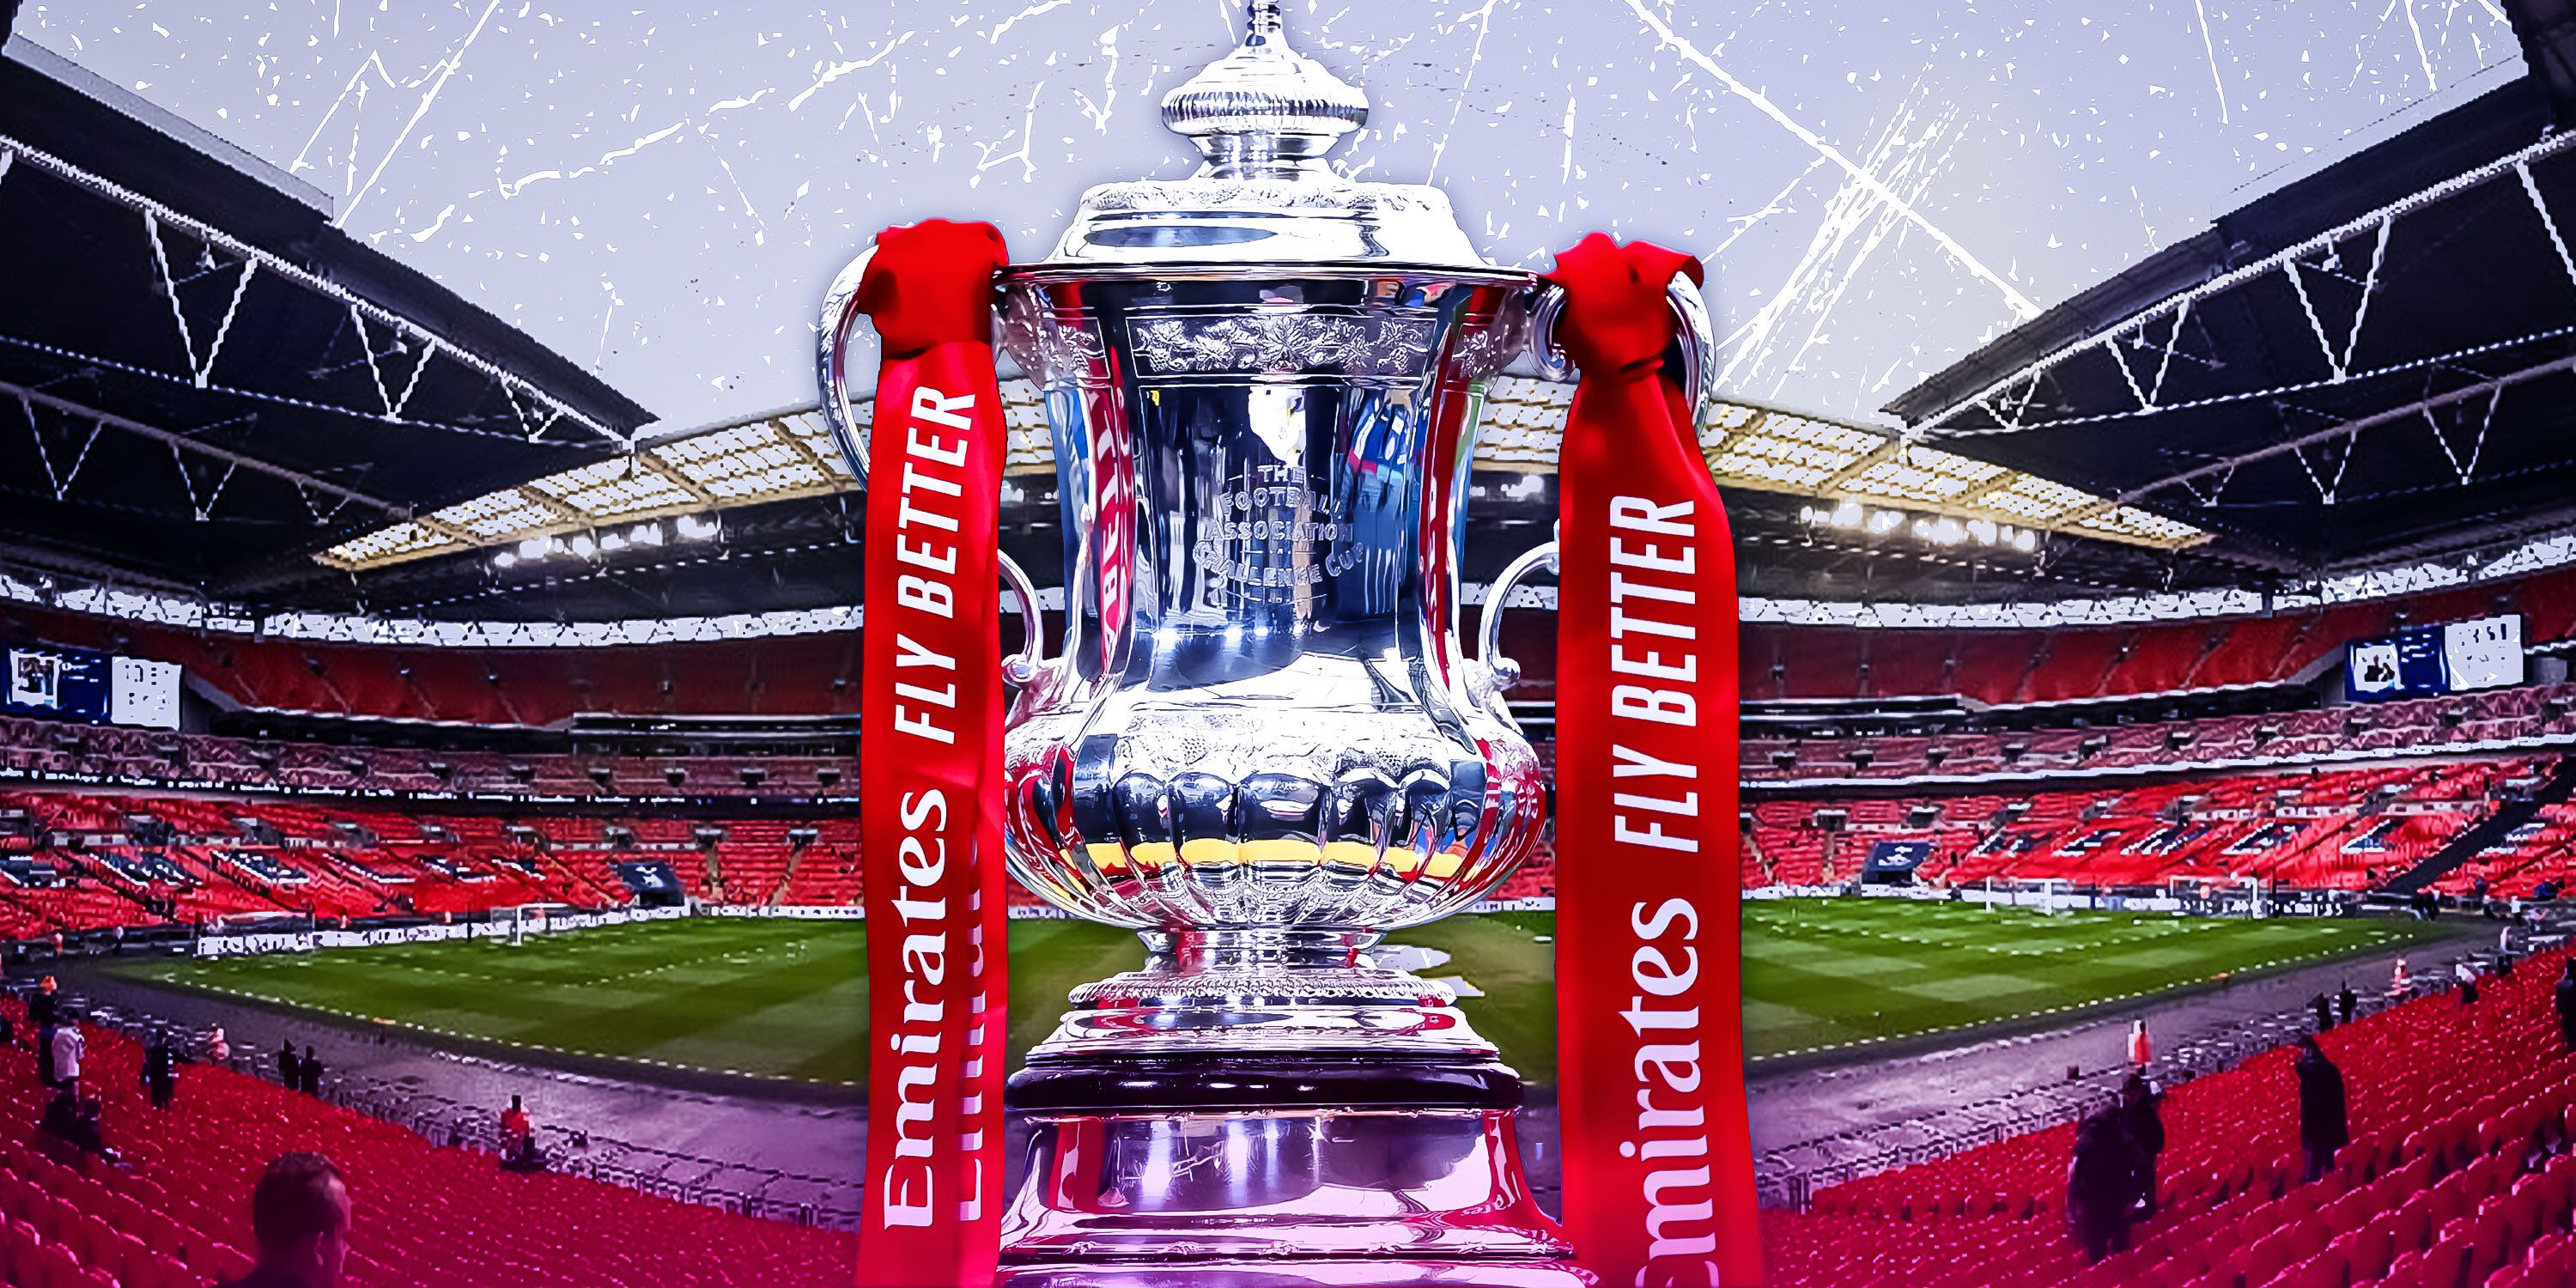 How the new FA Cup format will look